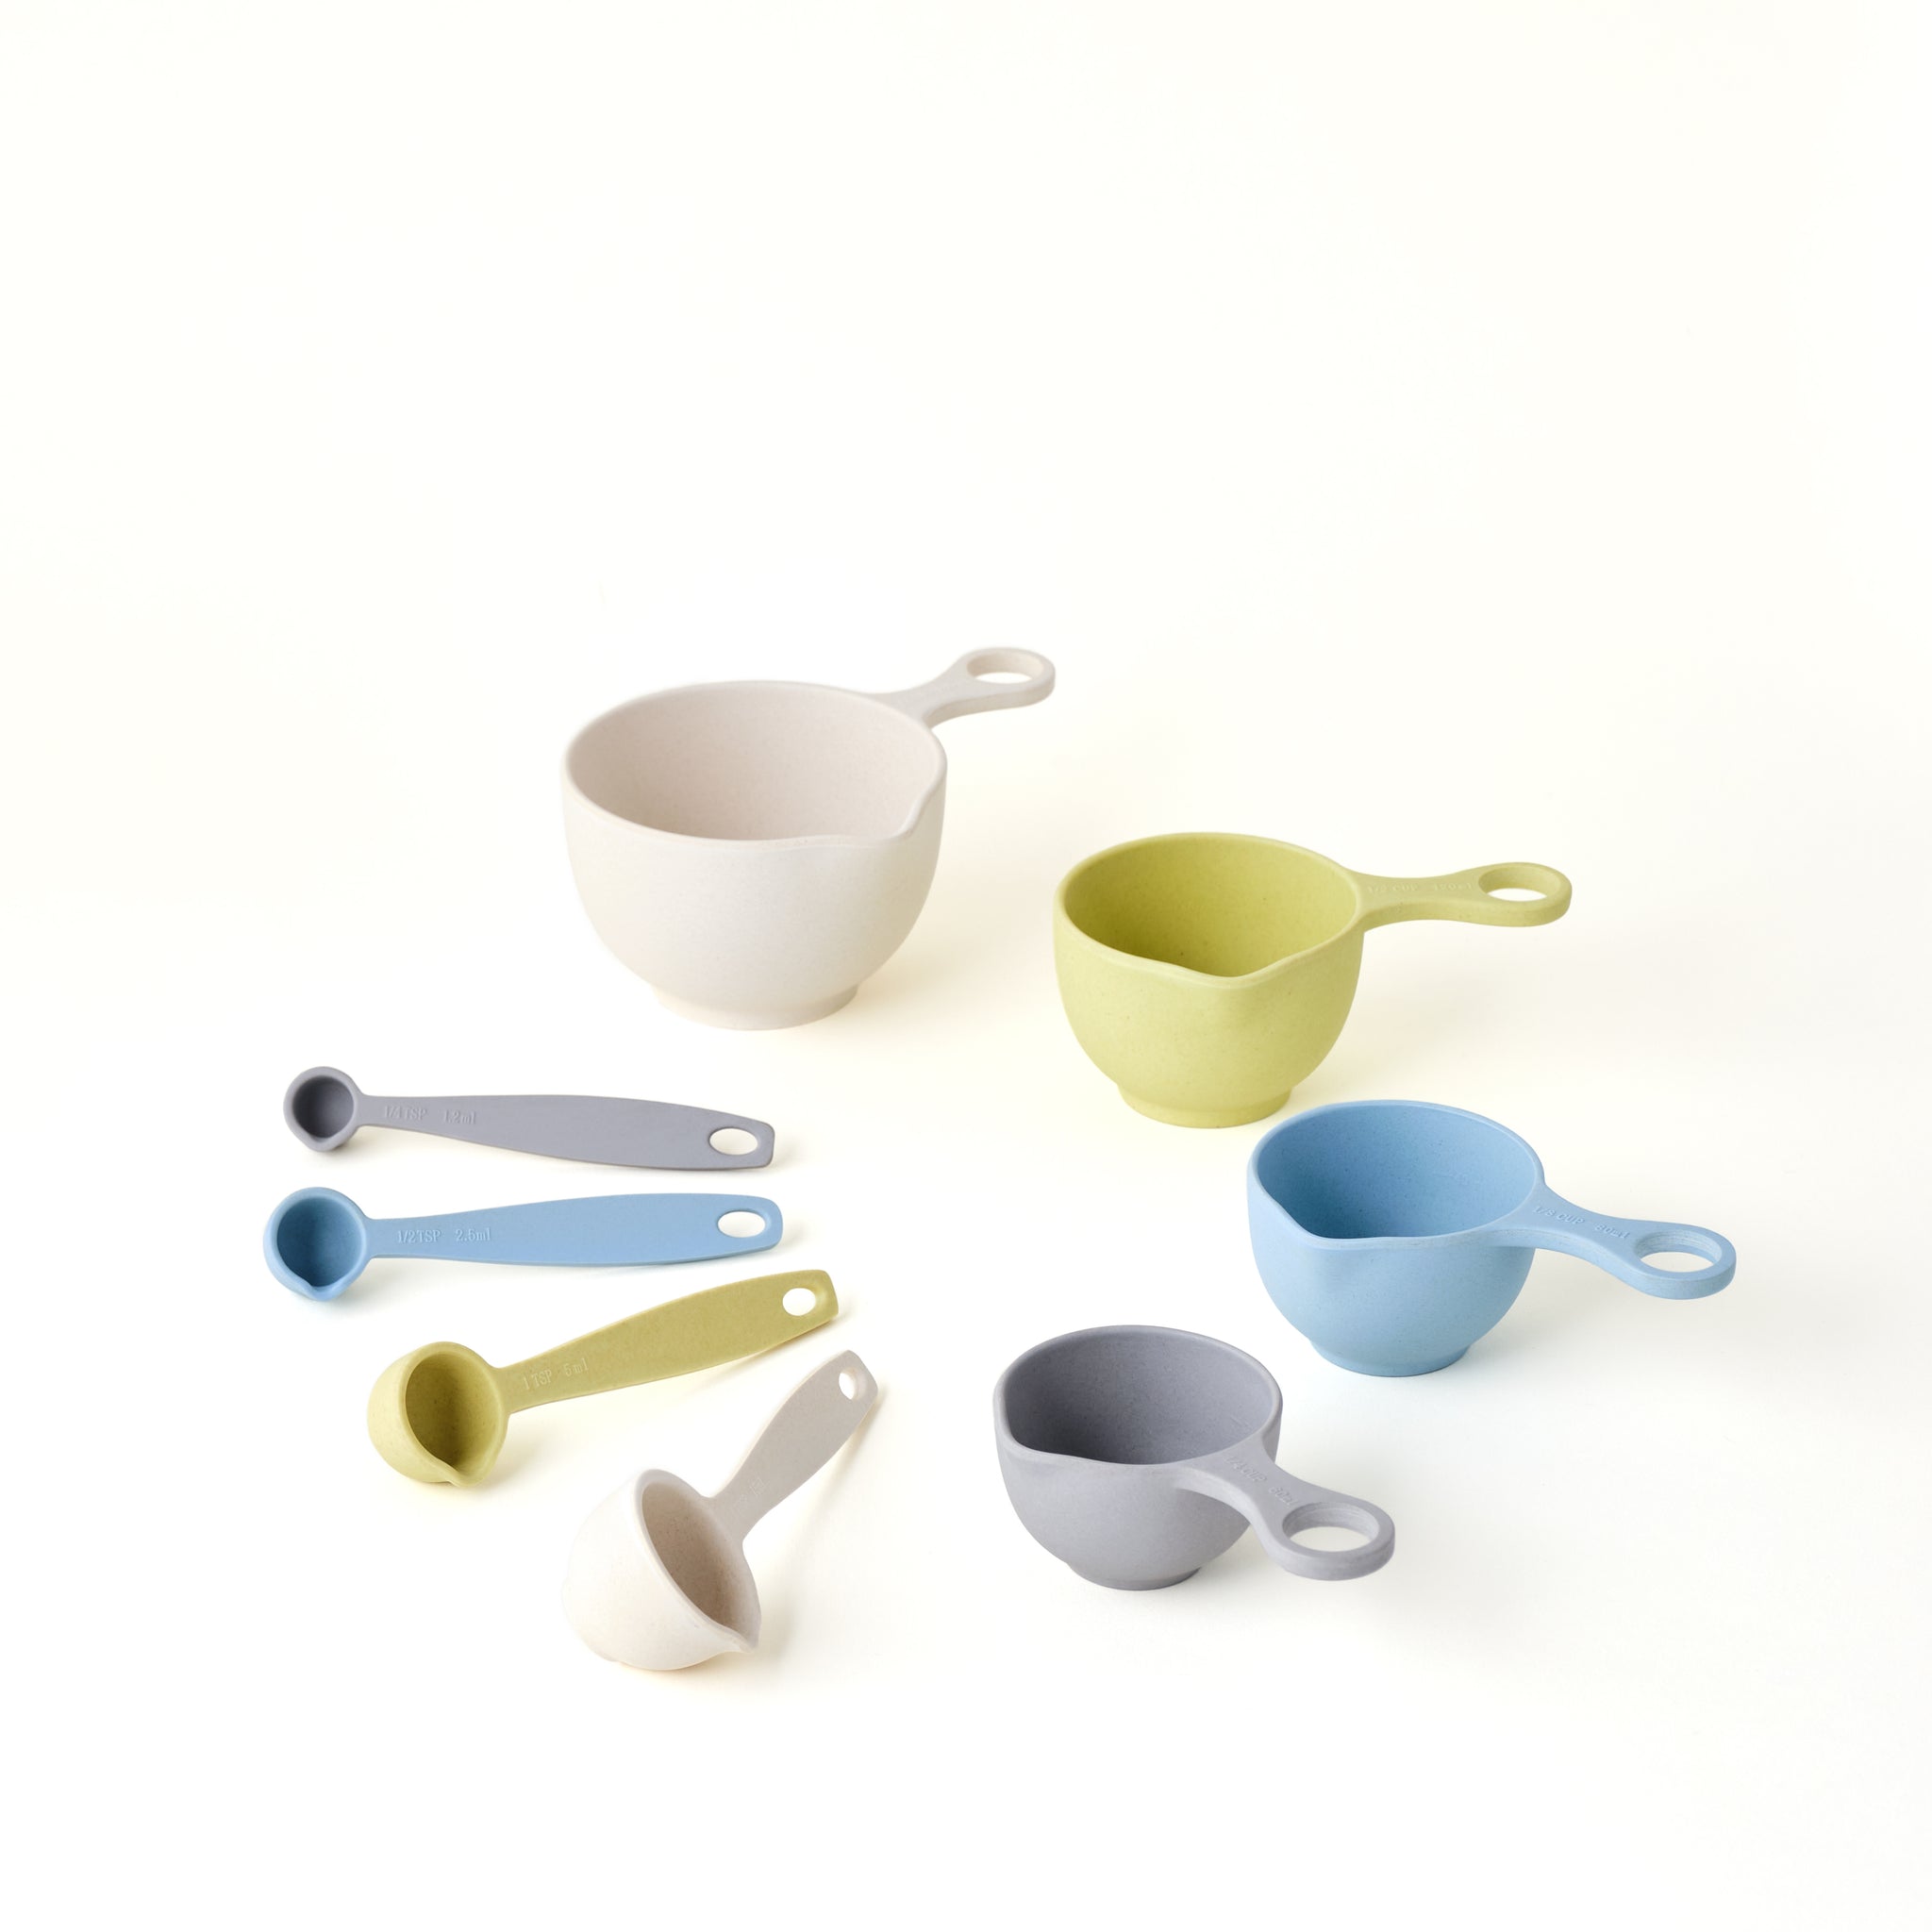 Order Measuring Cups and Spoon Set